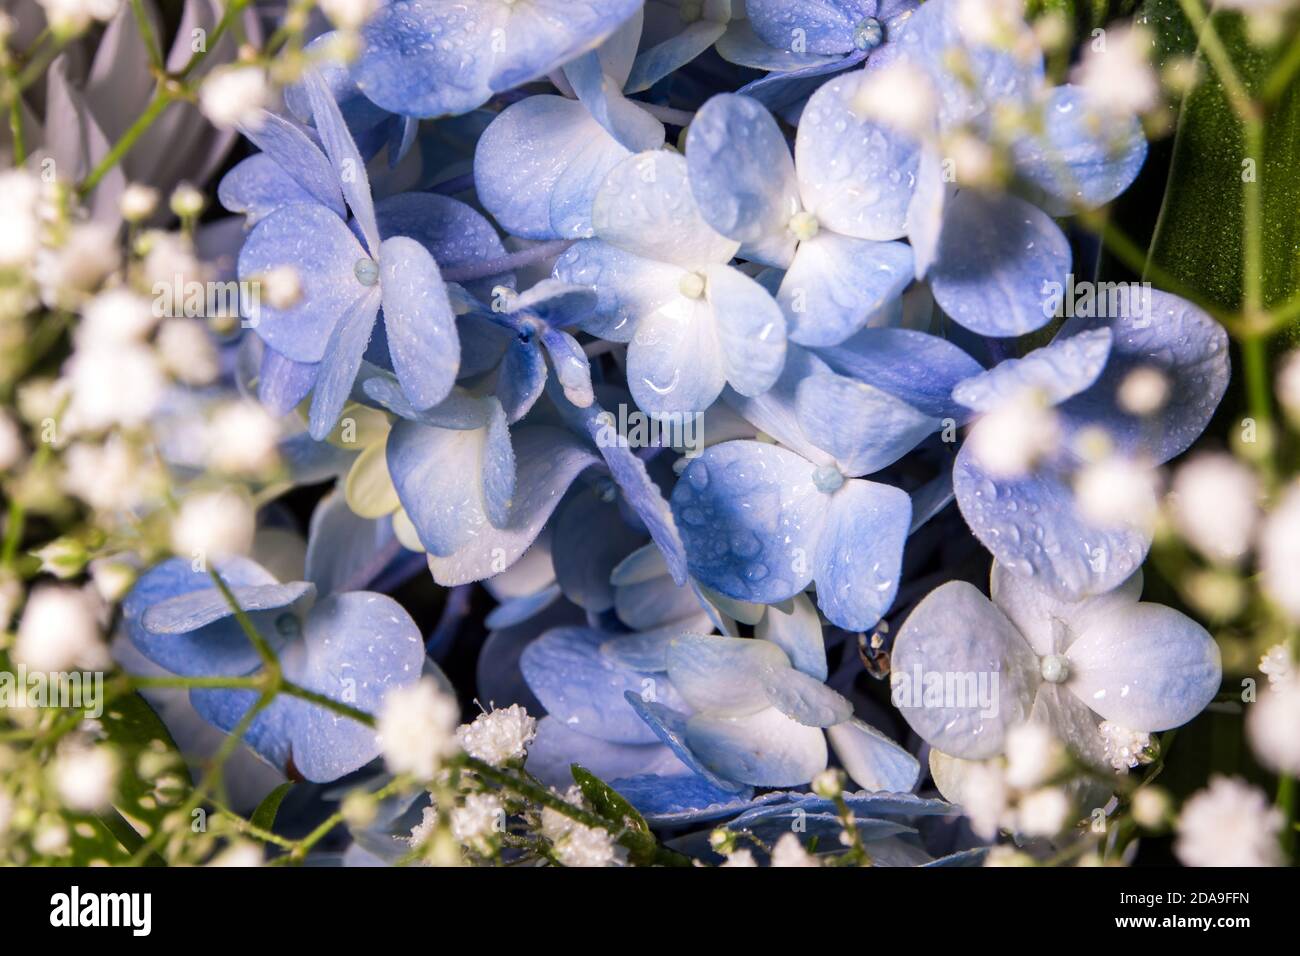 Blue fragile flowers and small white flower in the flower bouquet Stock Photo